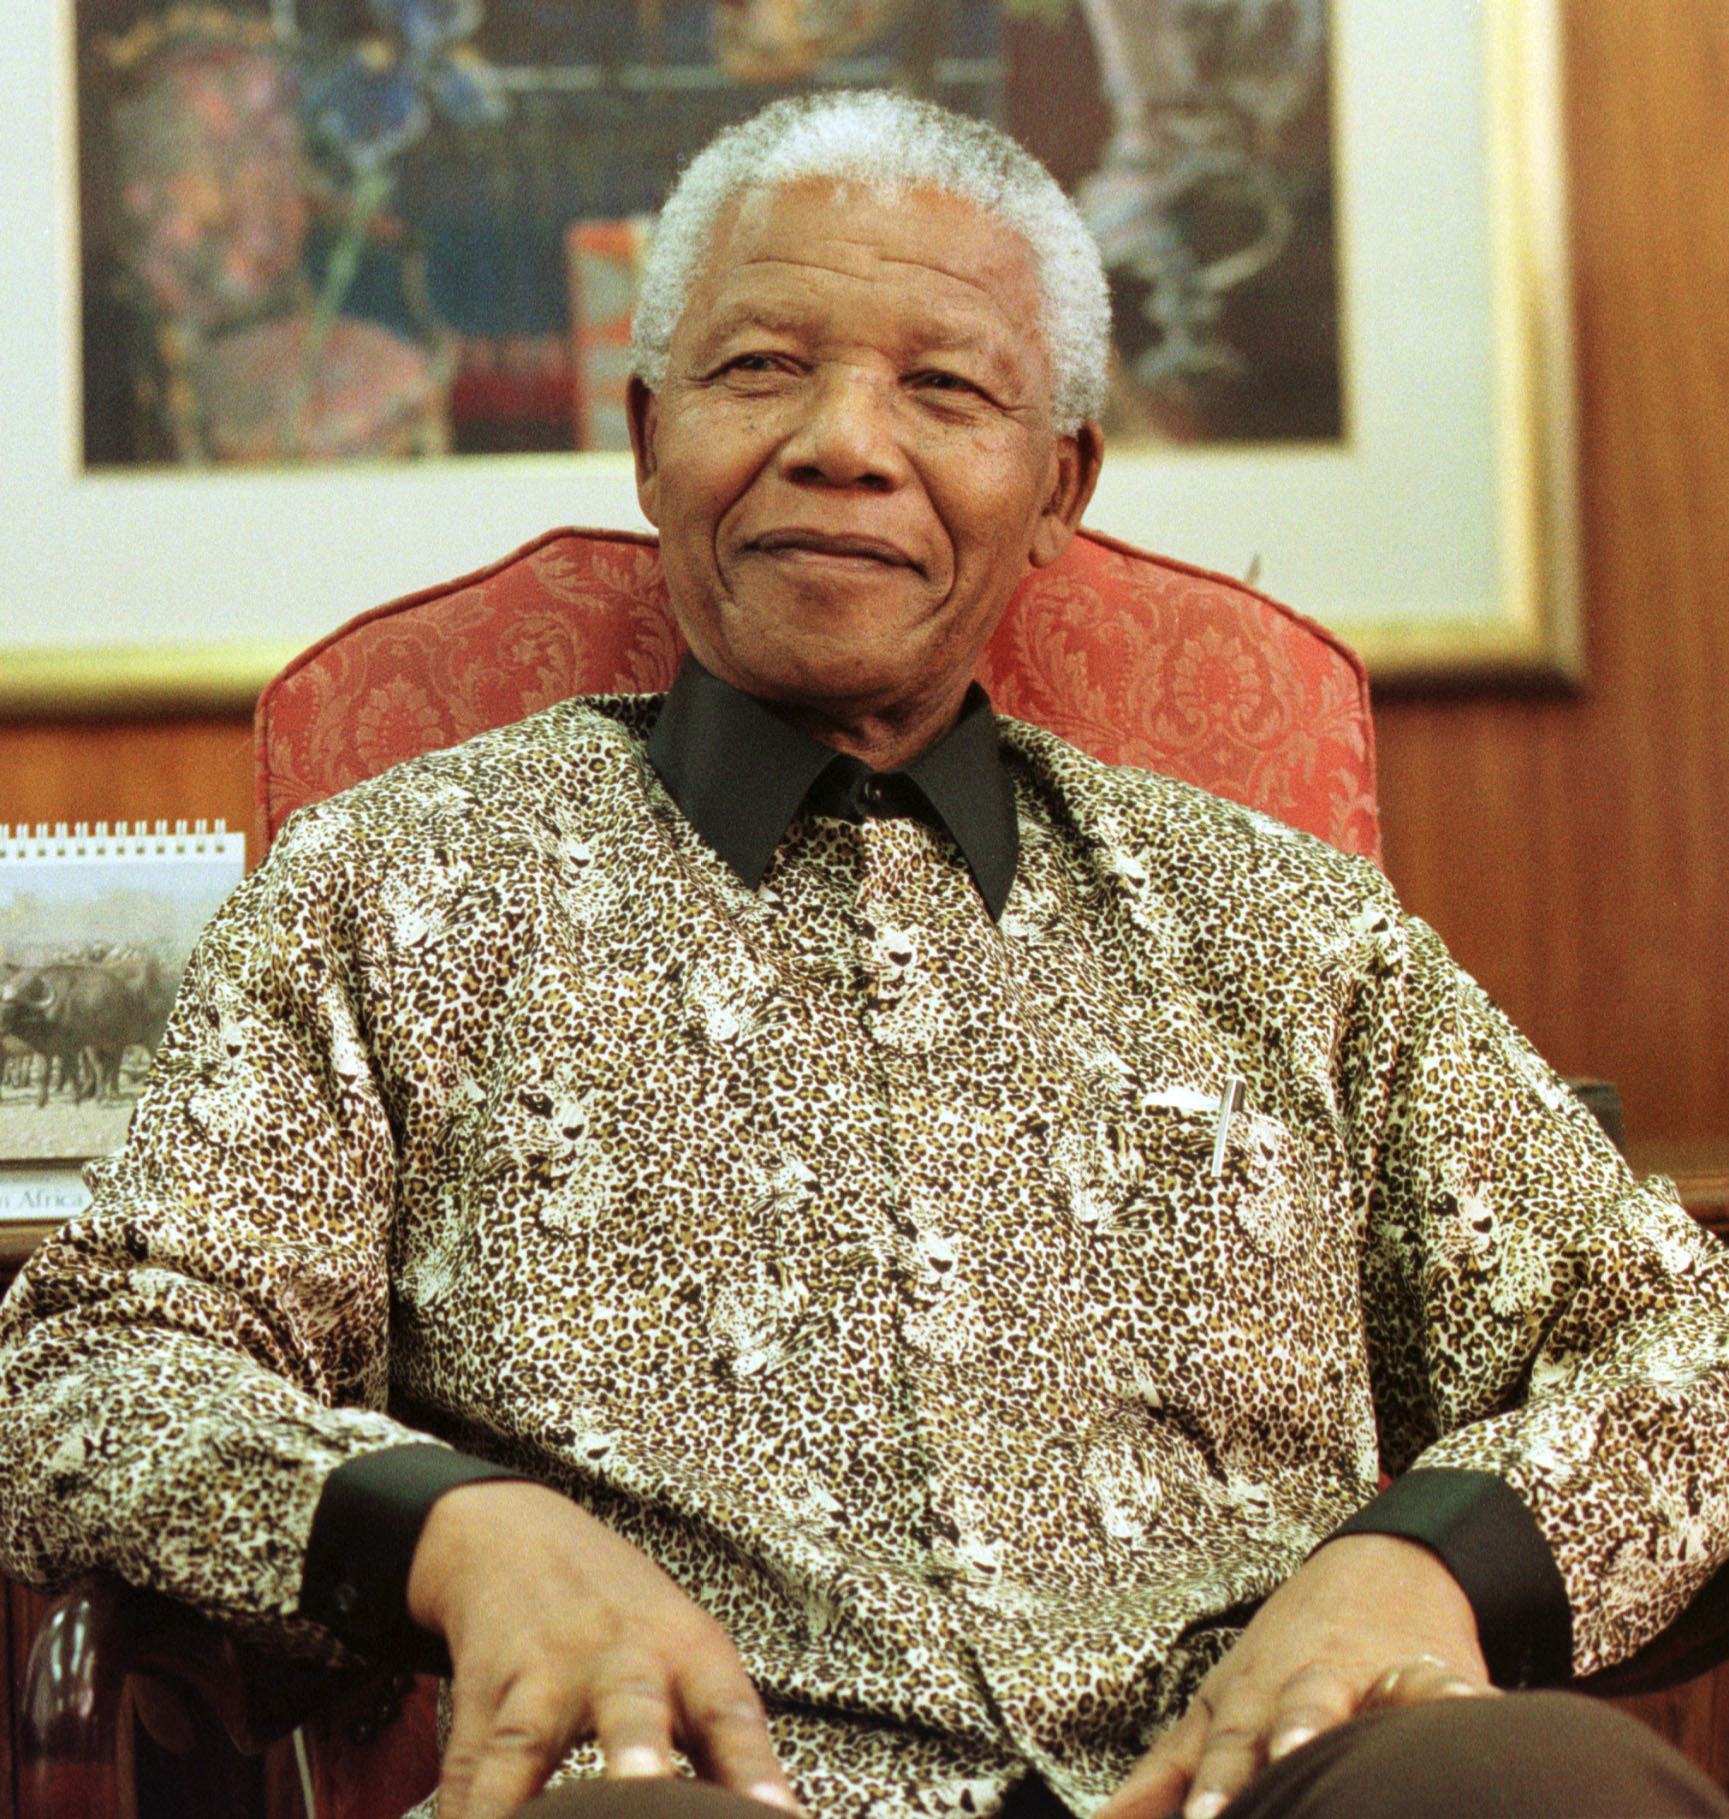 Nelson Mandela poses for photographers in the South African embassy